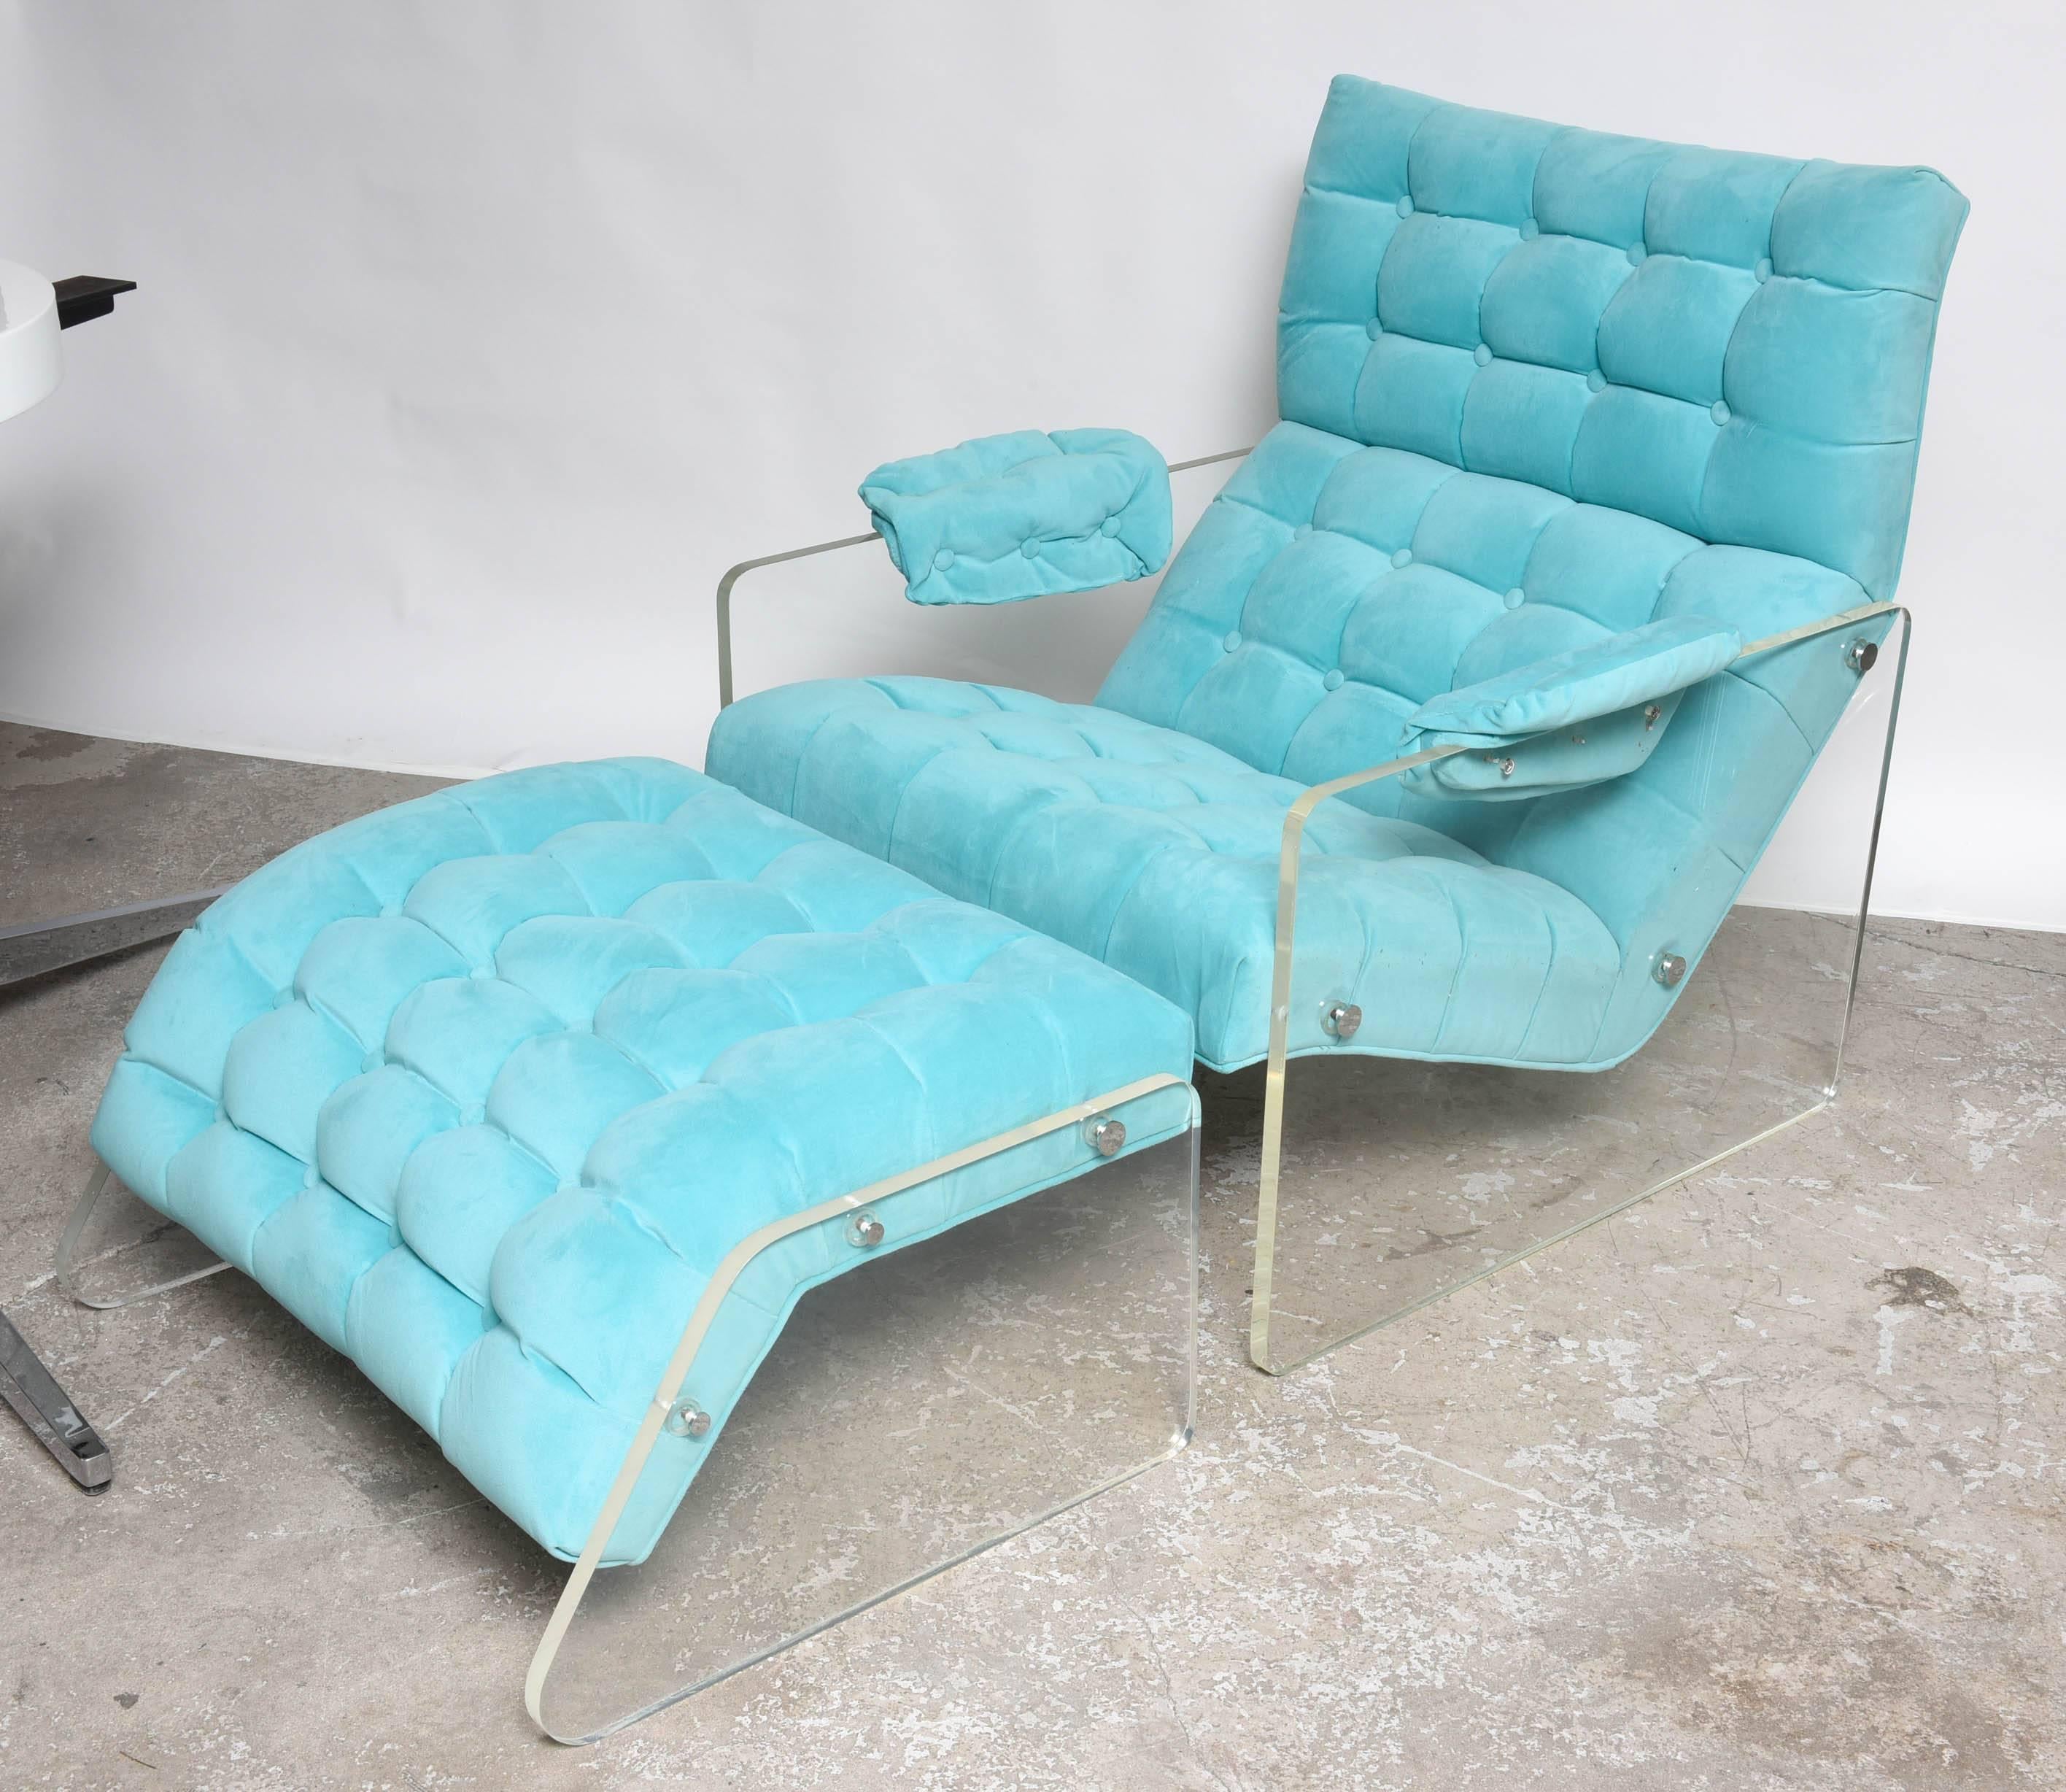 American Mid century Modern Floating Lucite Lounge Chair and Ottoman Pace style